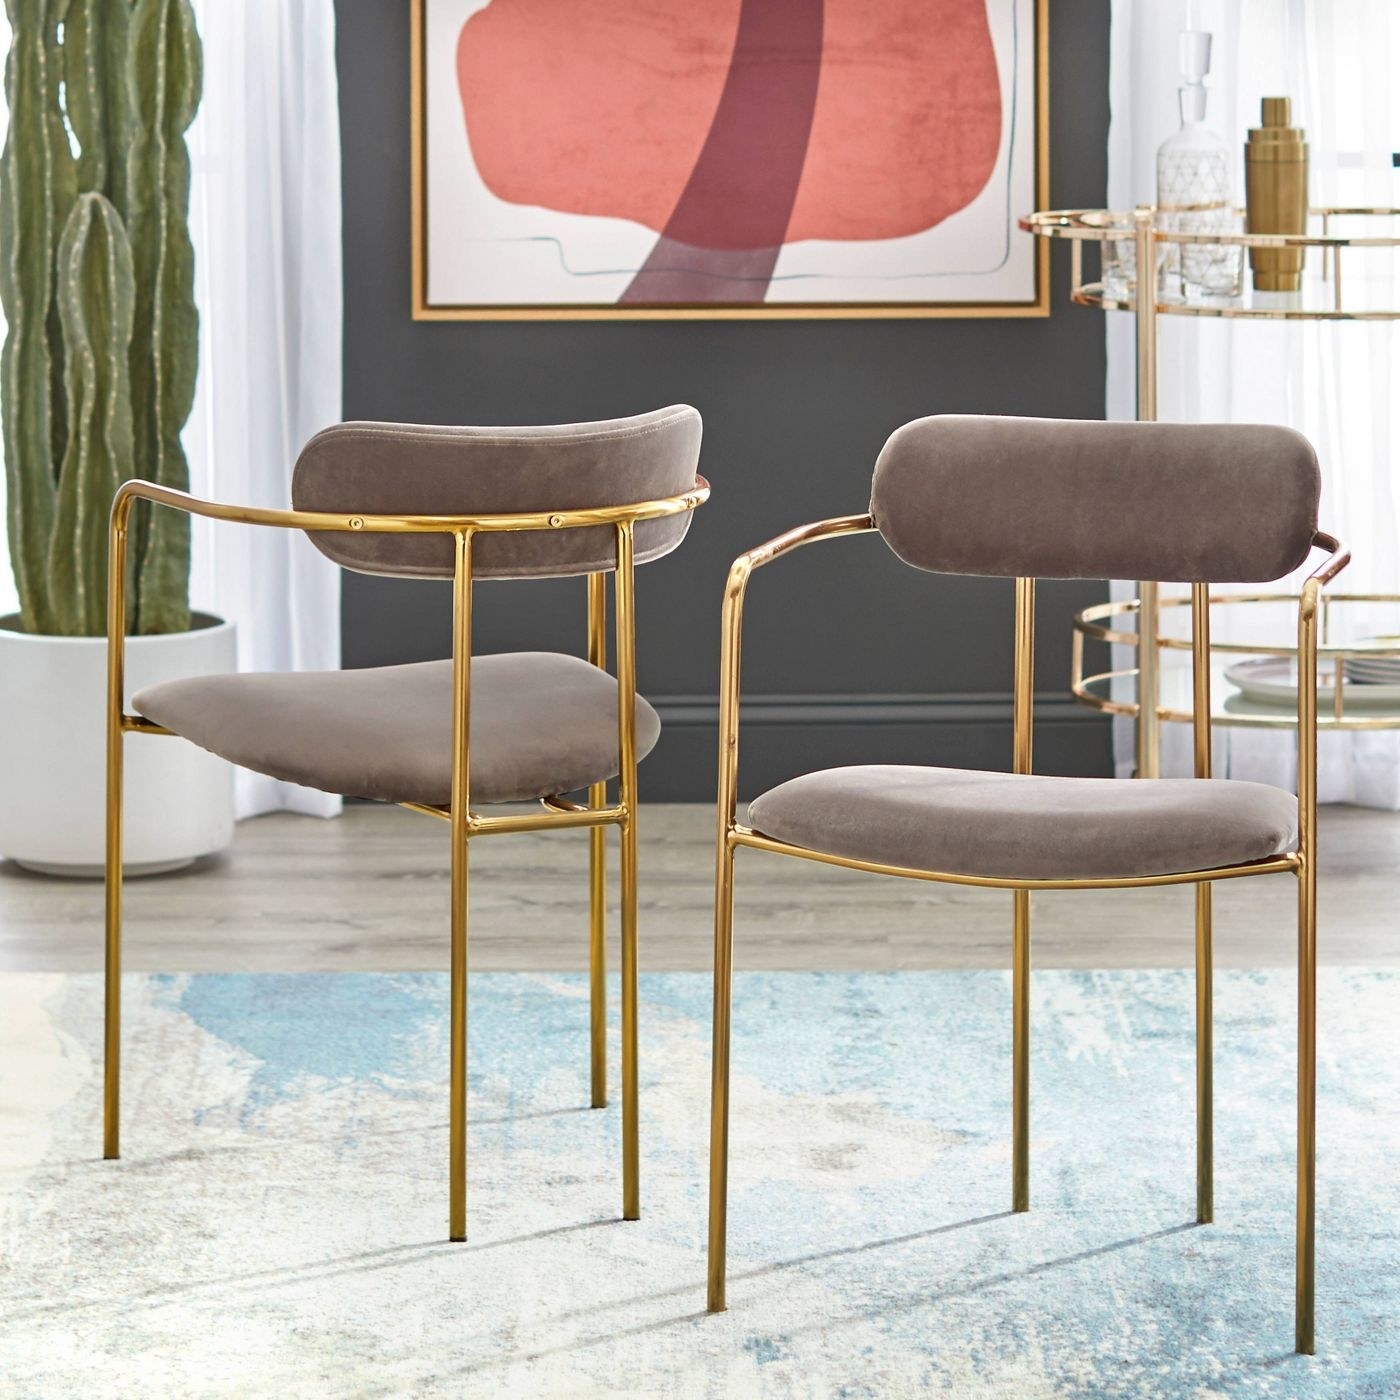 dining chairs with suede cushions and gold minimal legs and back rest